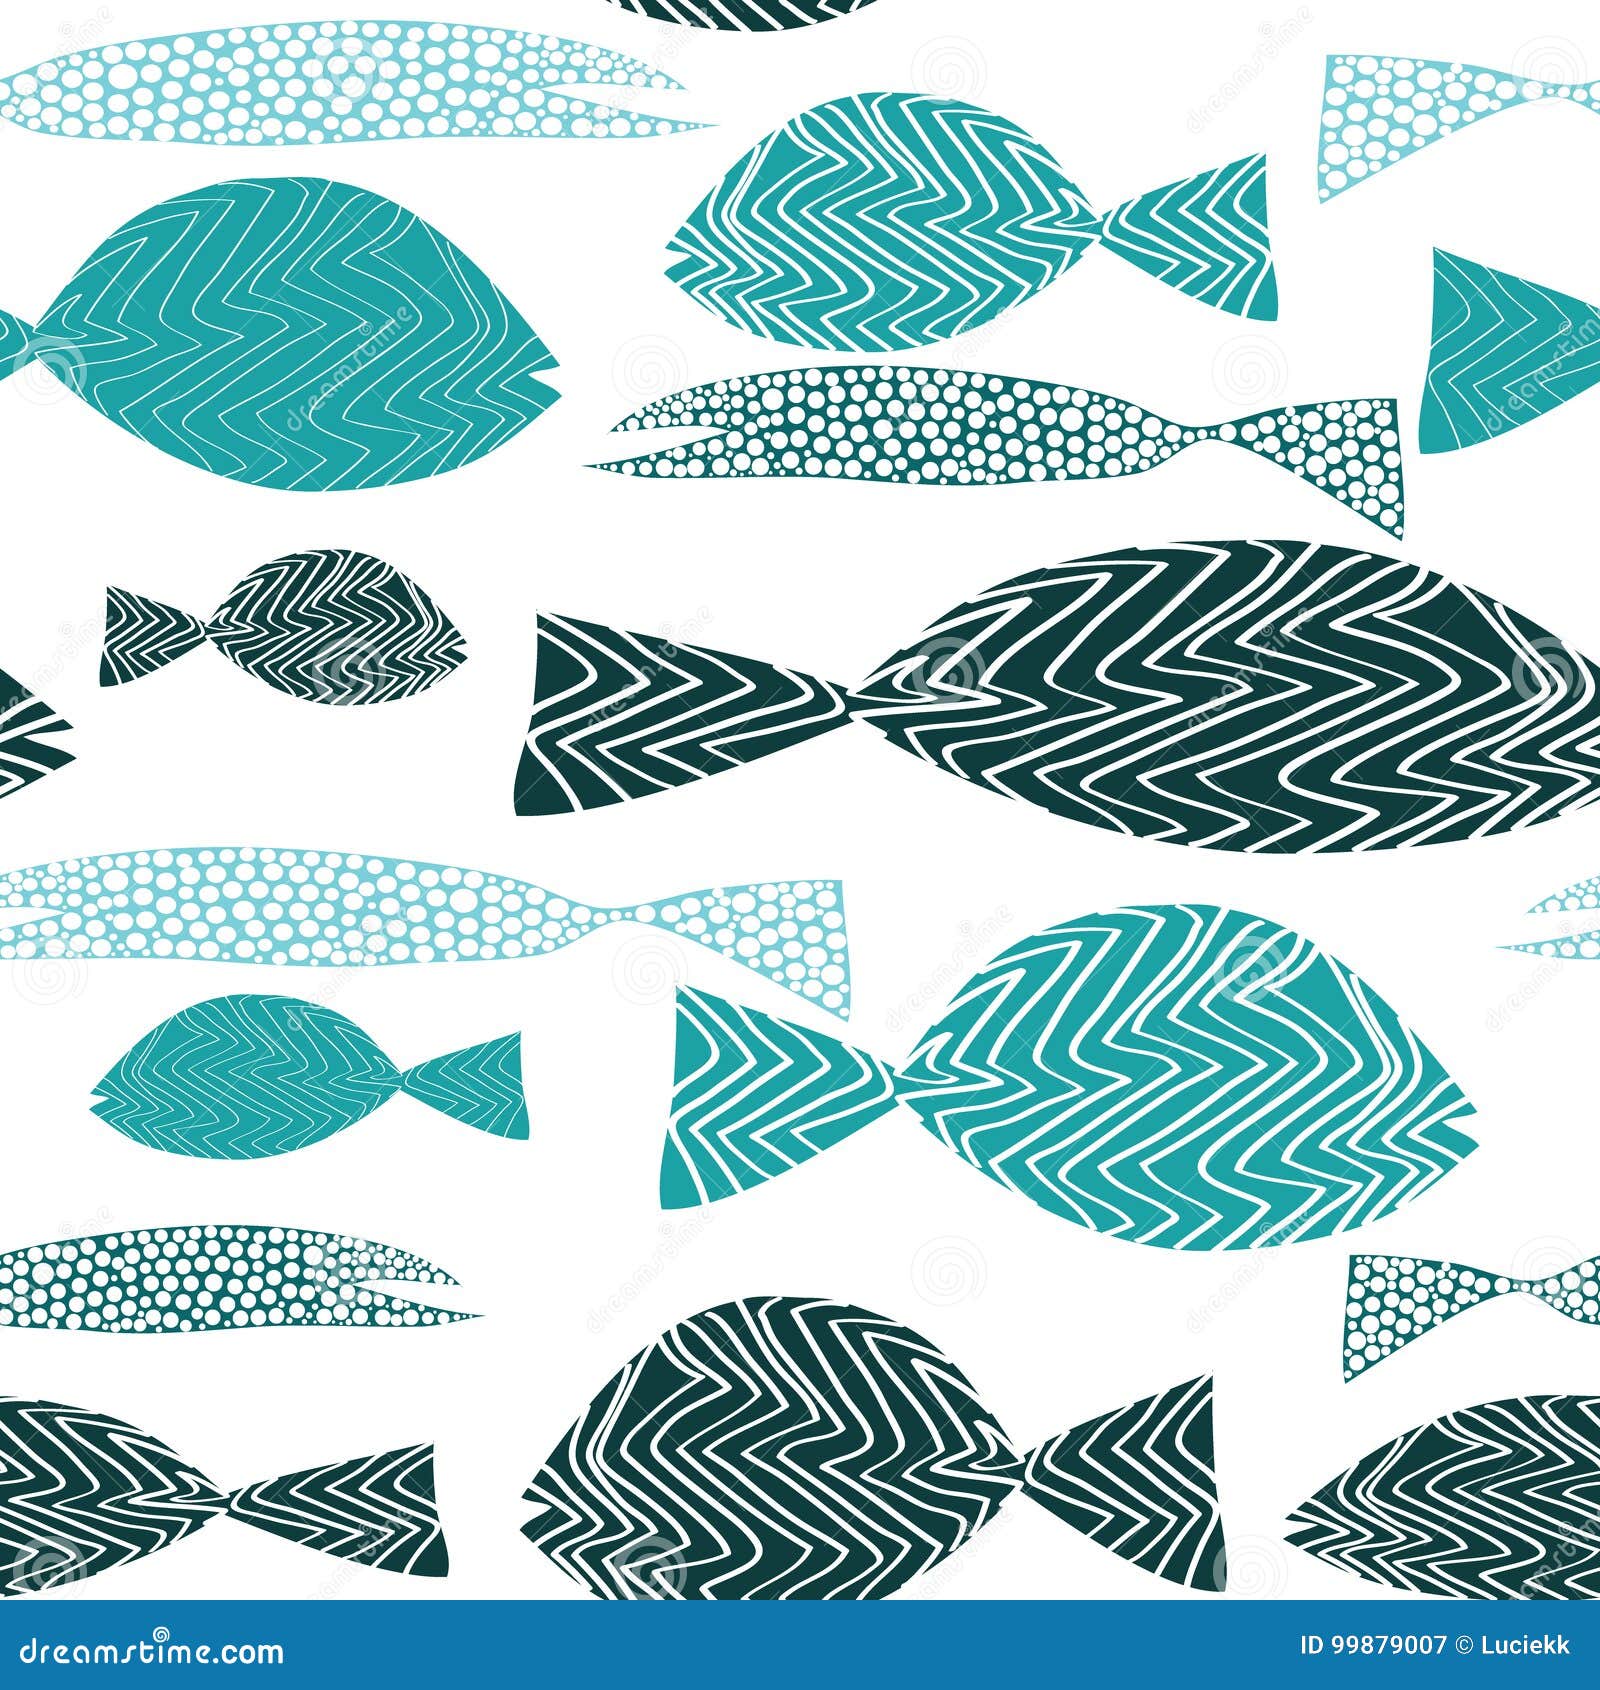 fish seamless pattern. various turquoise fish with stripes ans dots.   on white background